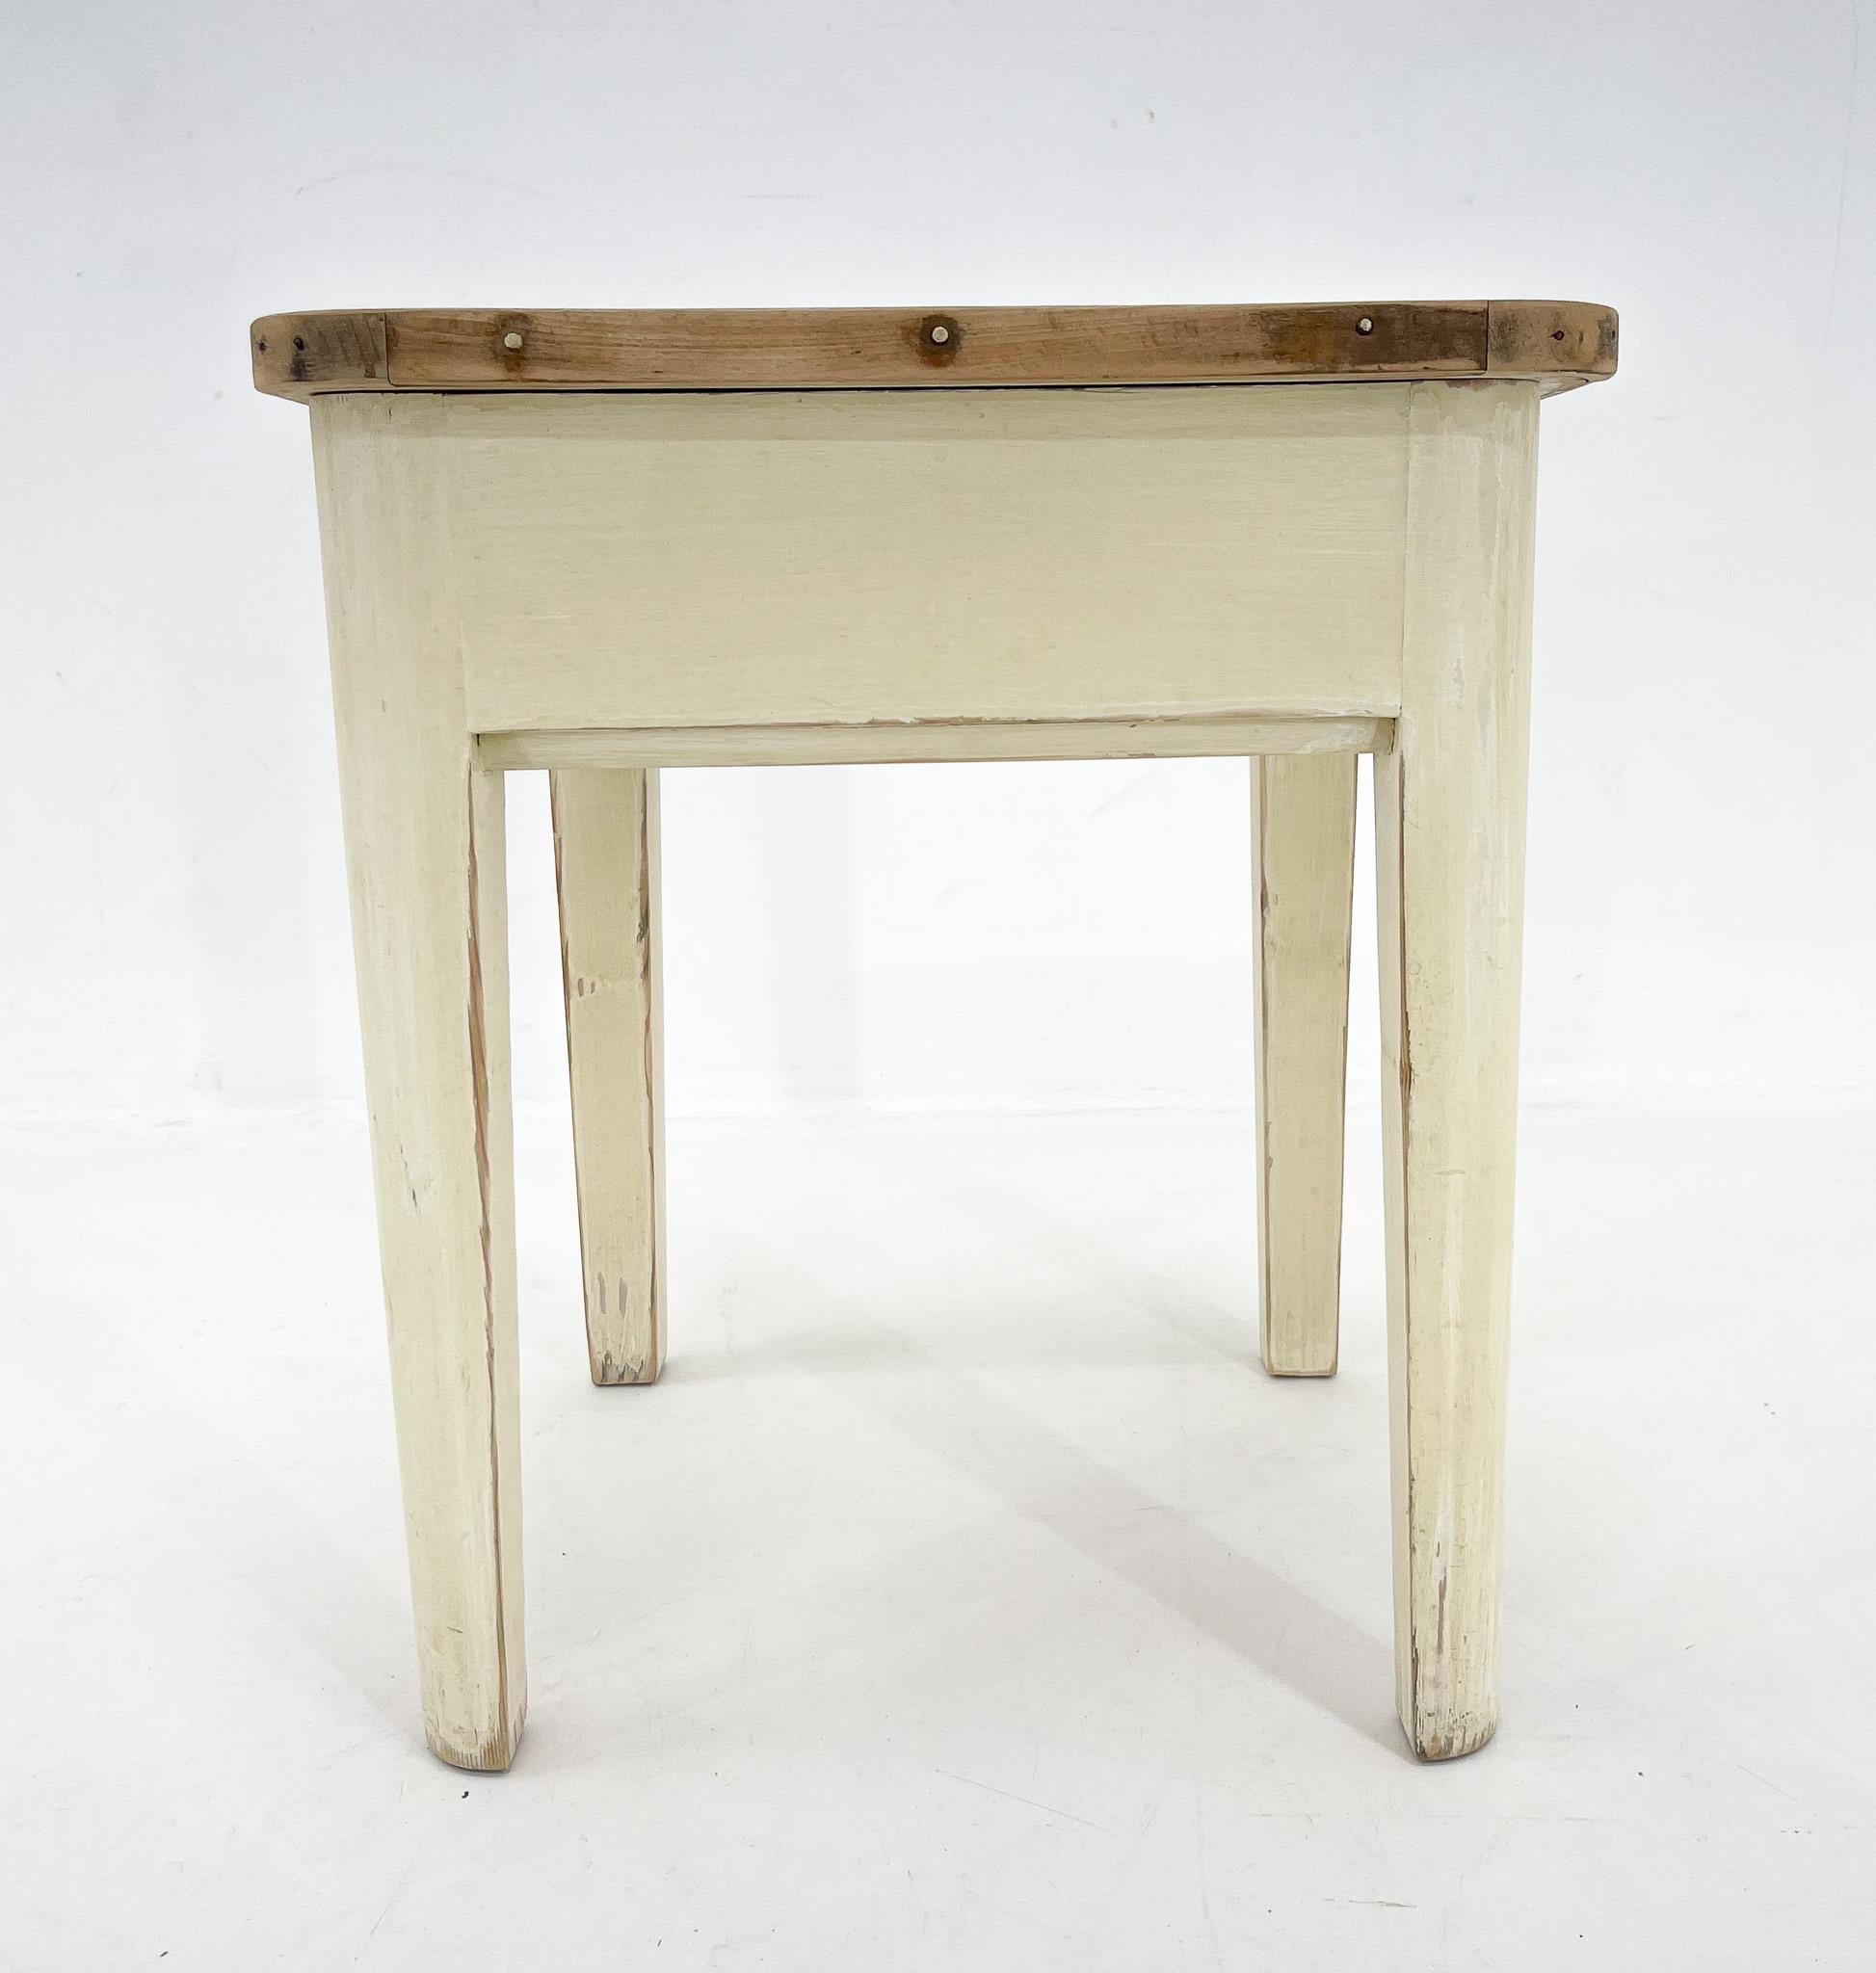 An all-wood stool from the 1950s with a hinged top with storage space underneath. All parts are original, including the paint on its bottom. Only the top has been sanded down.